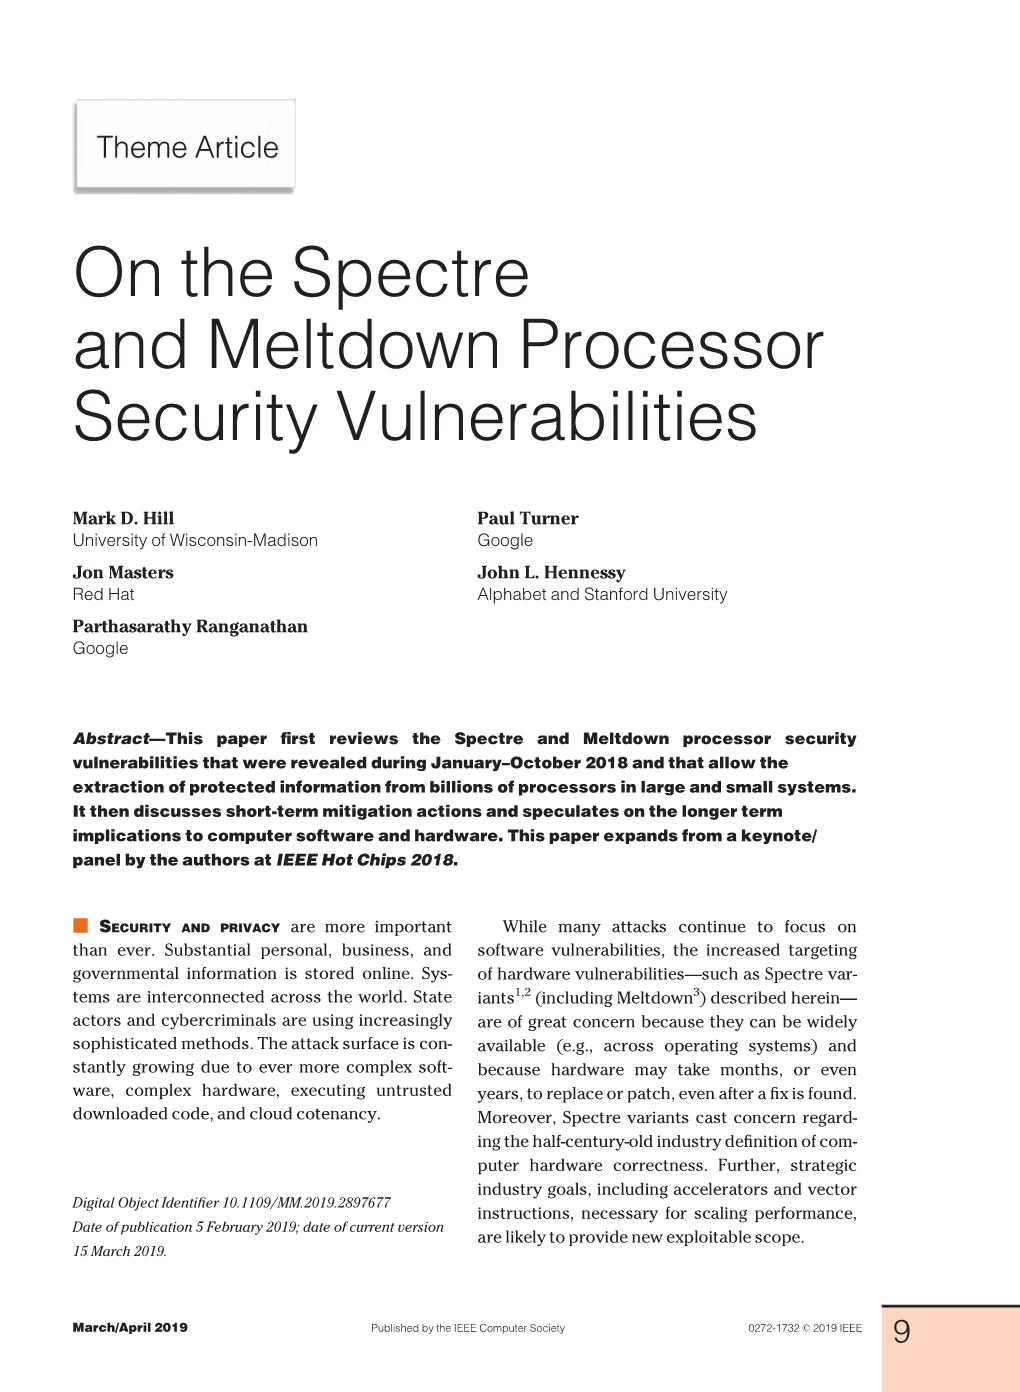 On the Spectre and Meltdown Processor Security Vulnerabilities